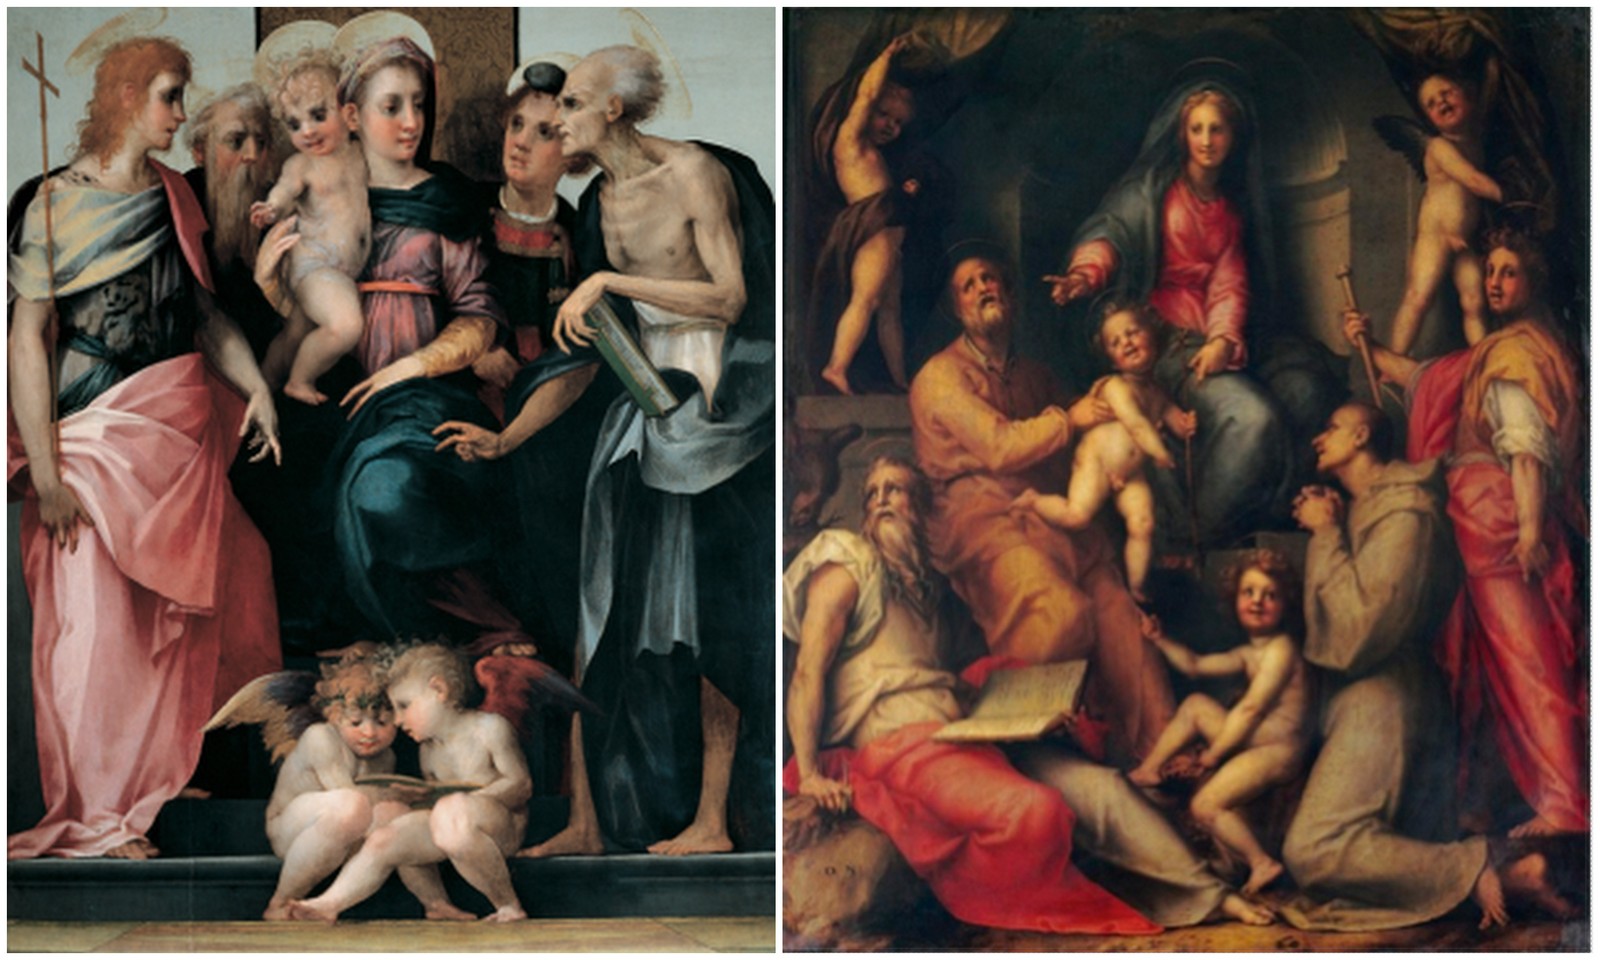 On the left is Rosso Fiorentino, Madonna and Child with Four Saints (Spedalingo Altarpiece), 1518, oil on canvas, 172 x 141.5 cm., Galleria degli Uffizi, Florence, and on the right Pontormo, Sacred Conversation (Pucci Altarpiece), 1518, oil on canvas, 221.5 x 189.5 cm., Church of San Michele Visdomini, Florence